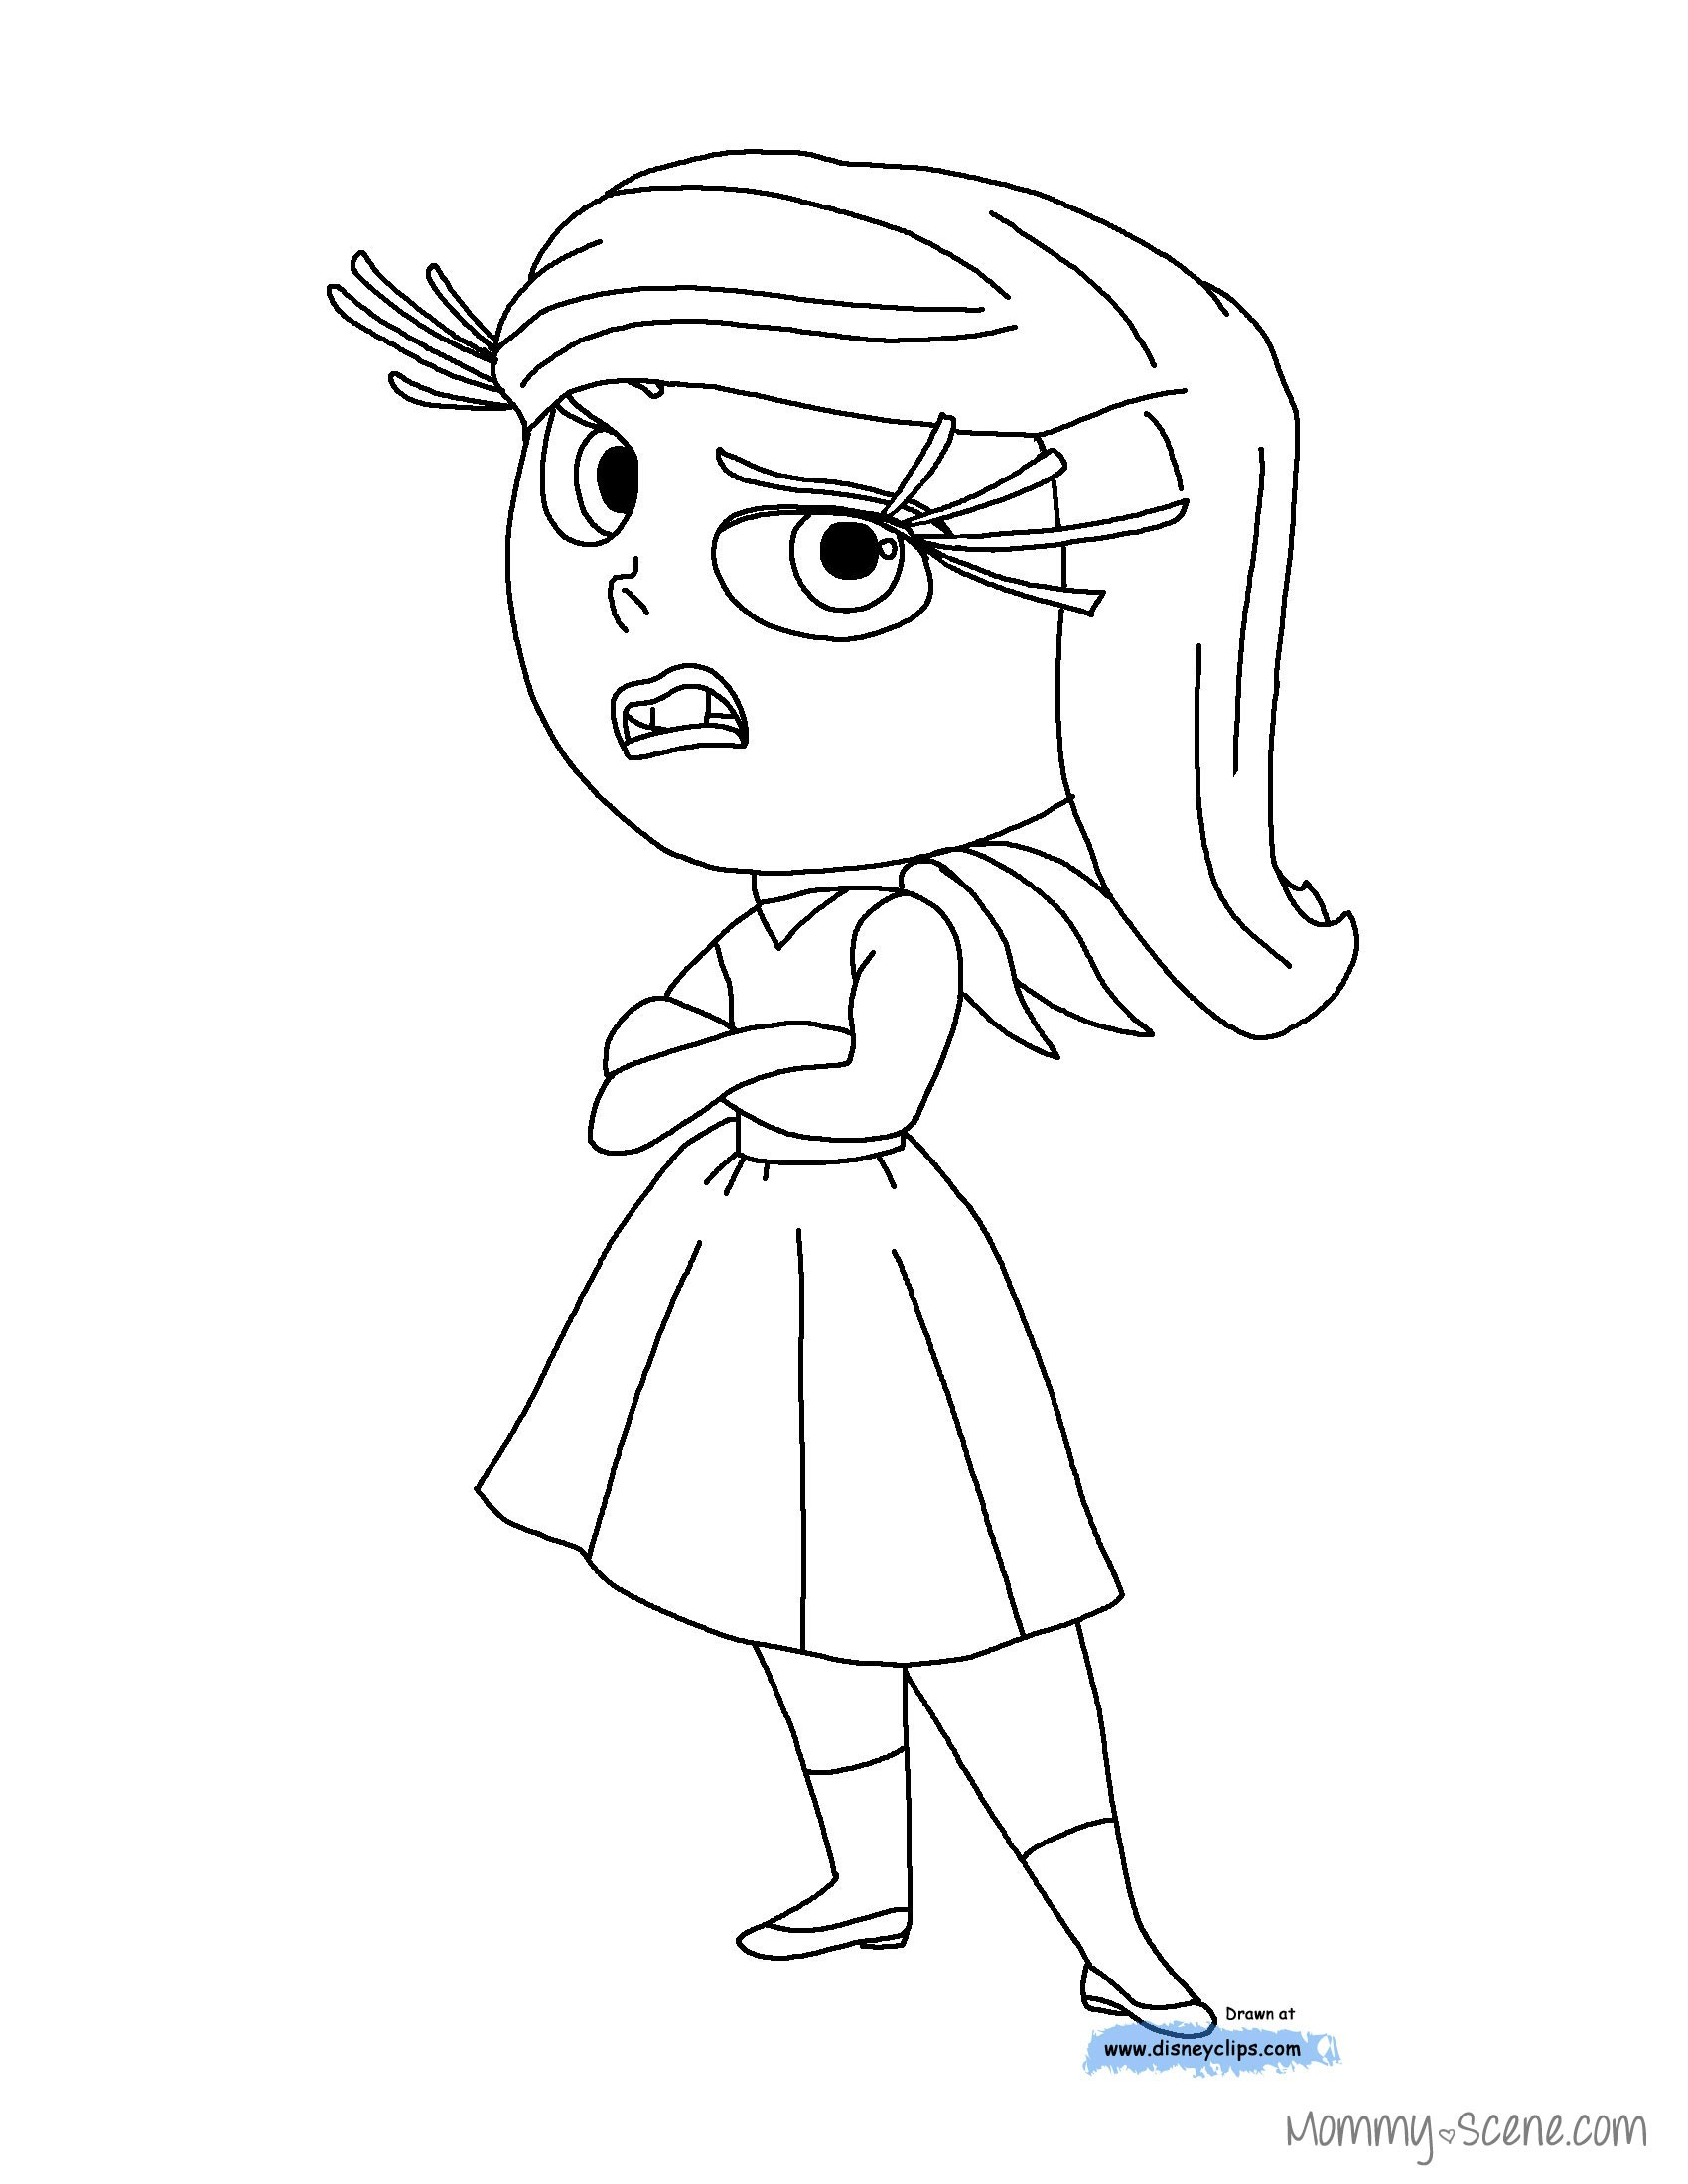 Inside Out Sadness Coloring Page Inside Out Sadness Coloring Page Brilliant Pages To Print For Kids